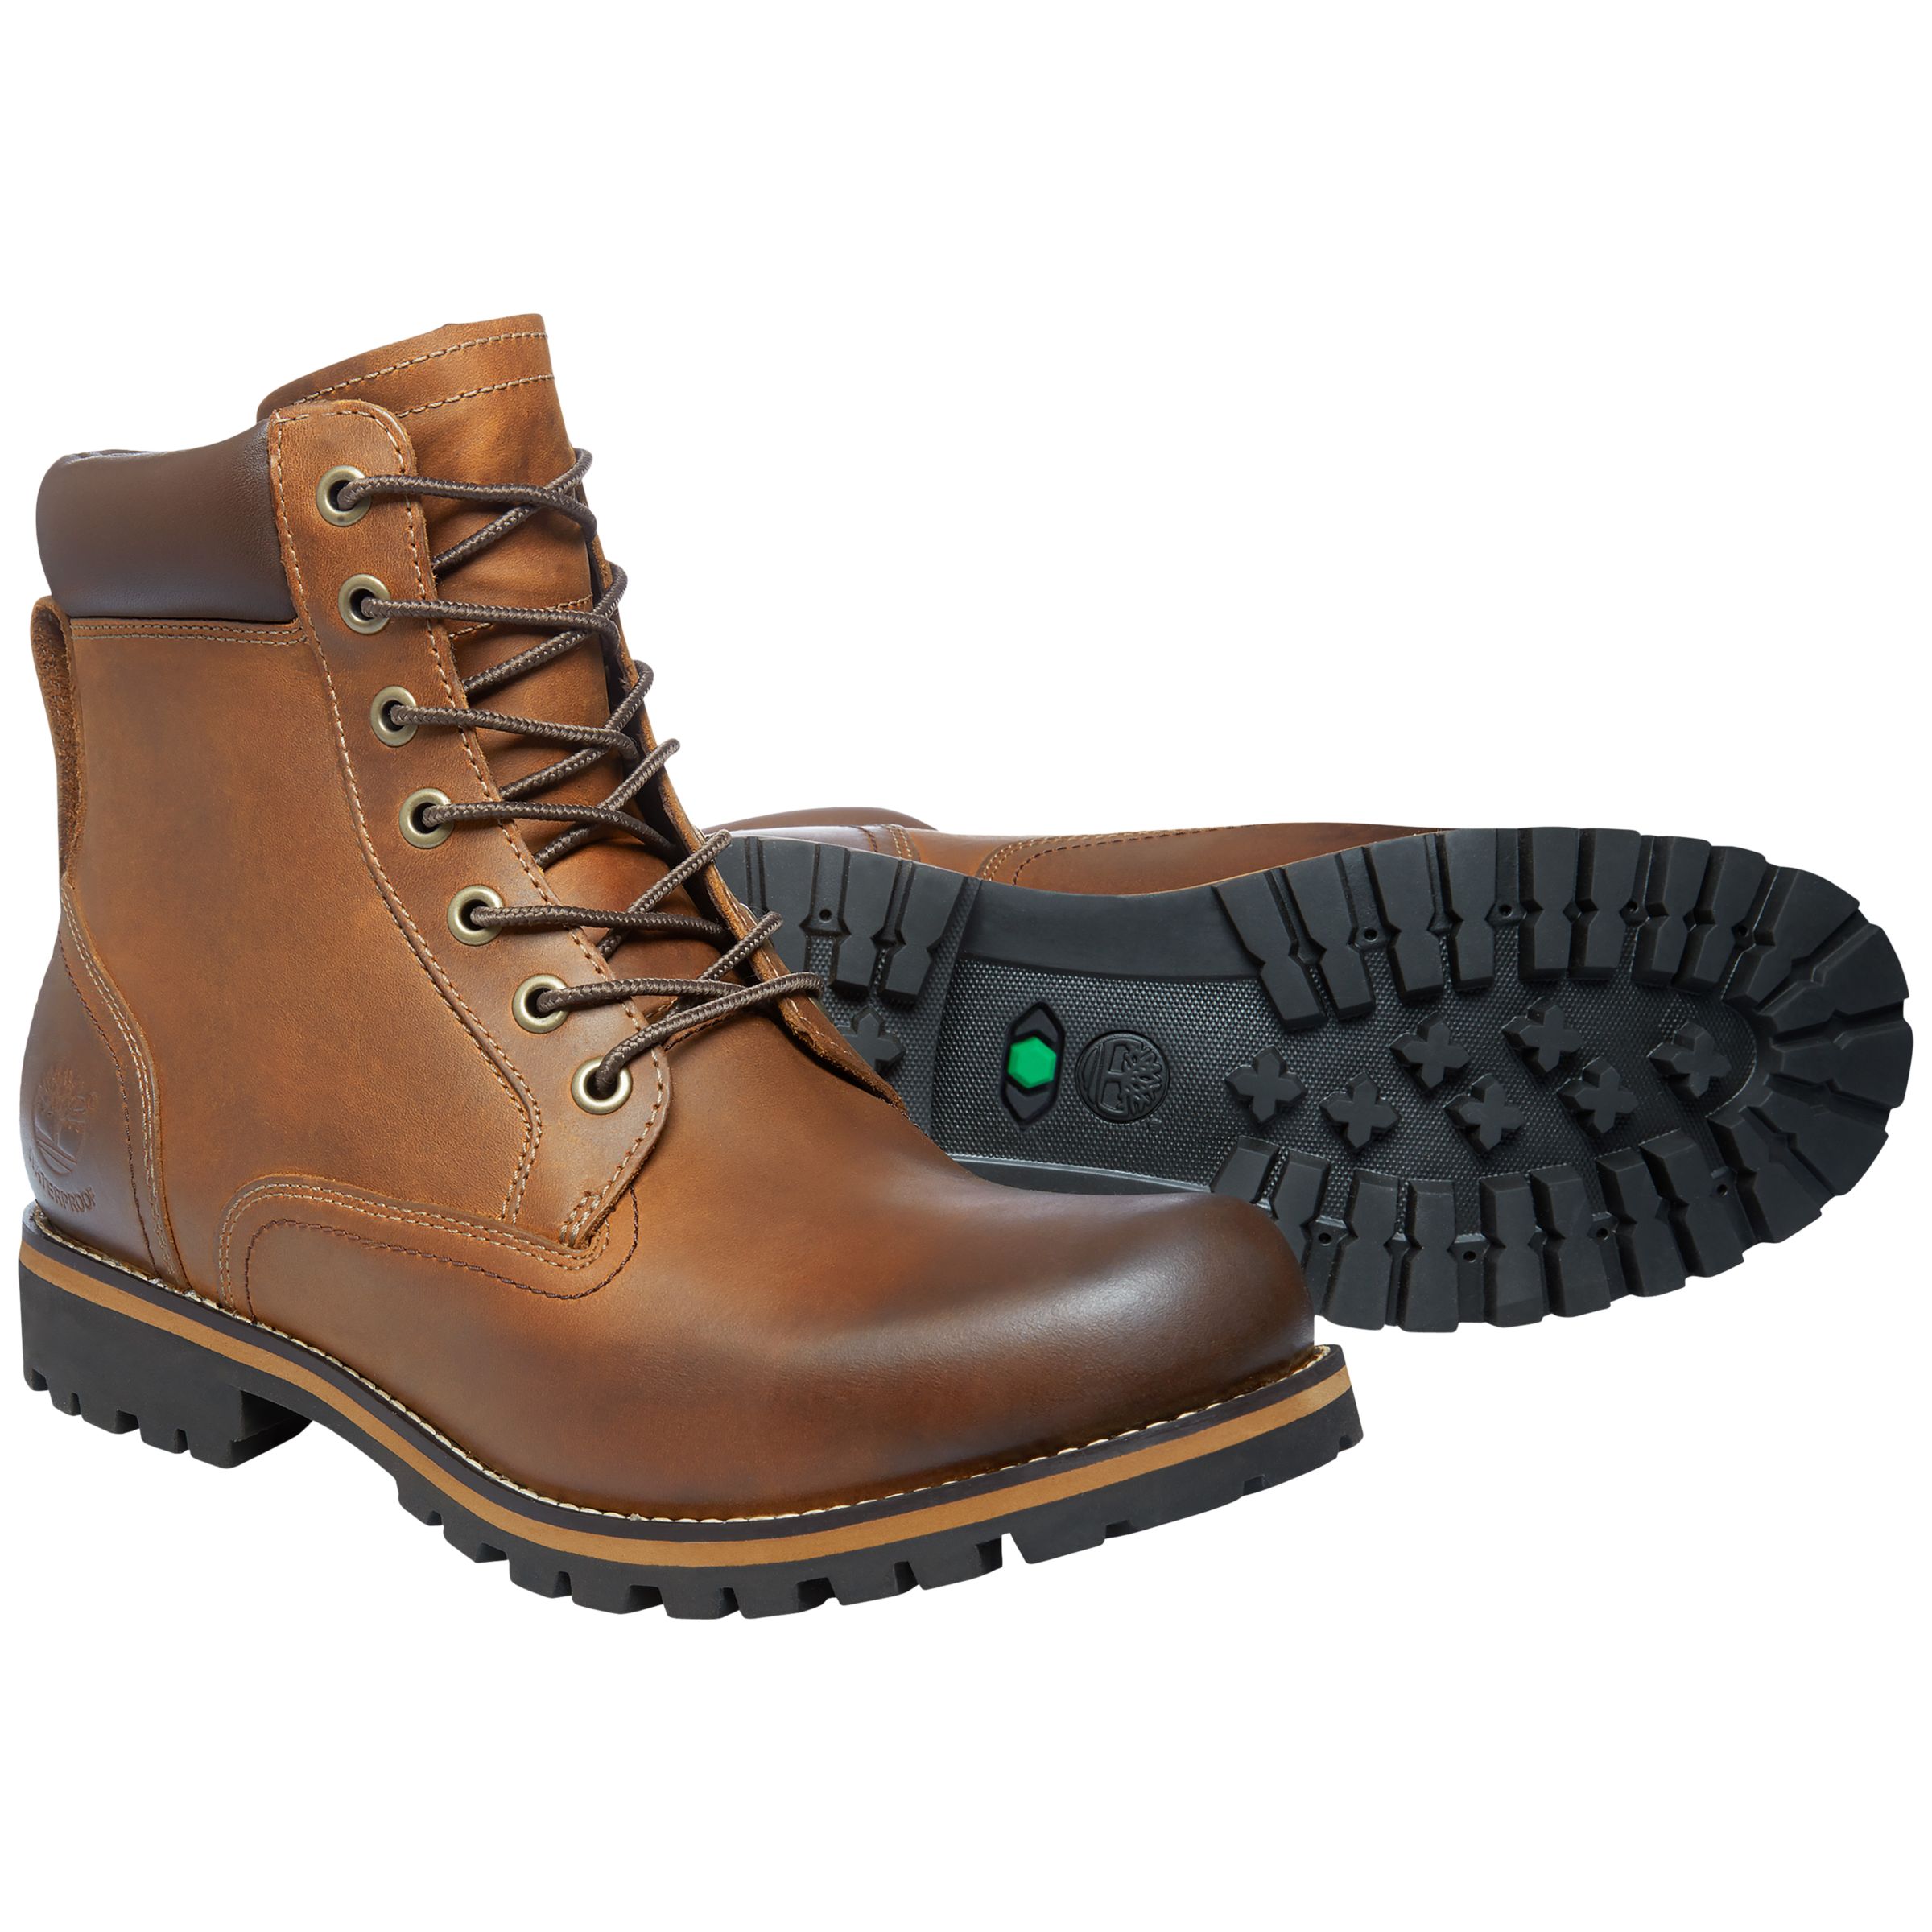 Timberland Earthkeepers Rugged 6-Inch Waterproof Plain Toe Boots